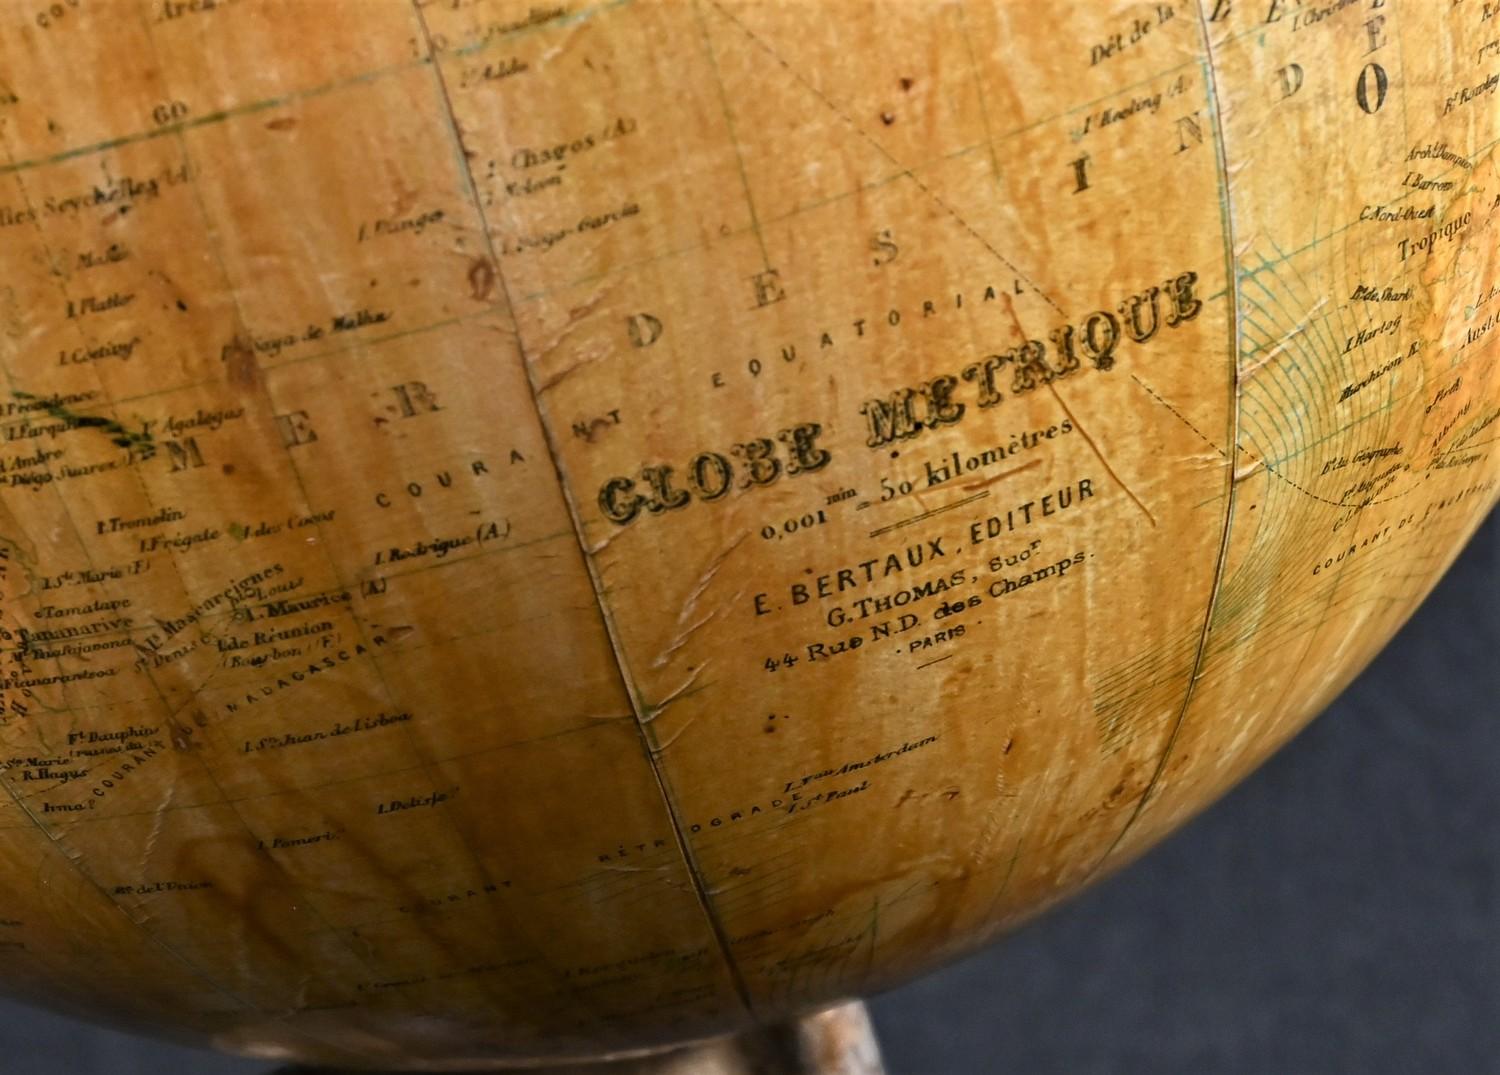 A 19th century French terrestrial globe, Globe Metrique, by Emile Bertaux, Paris, brass meridian - Image 3 of 4